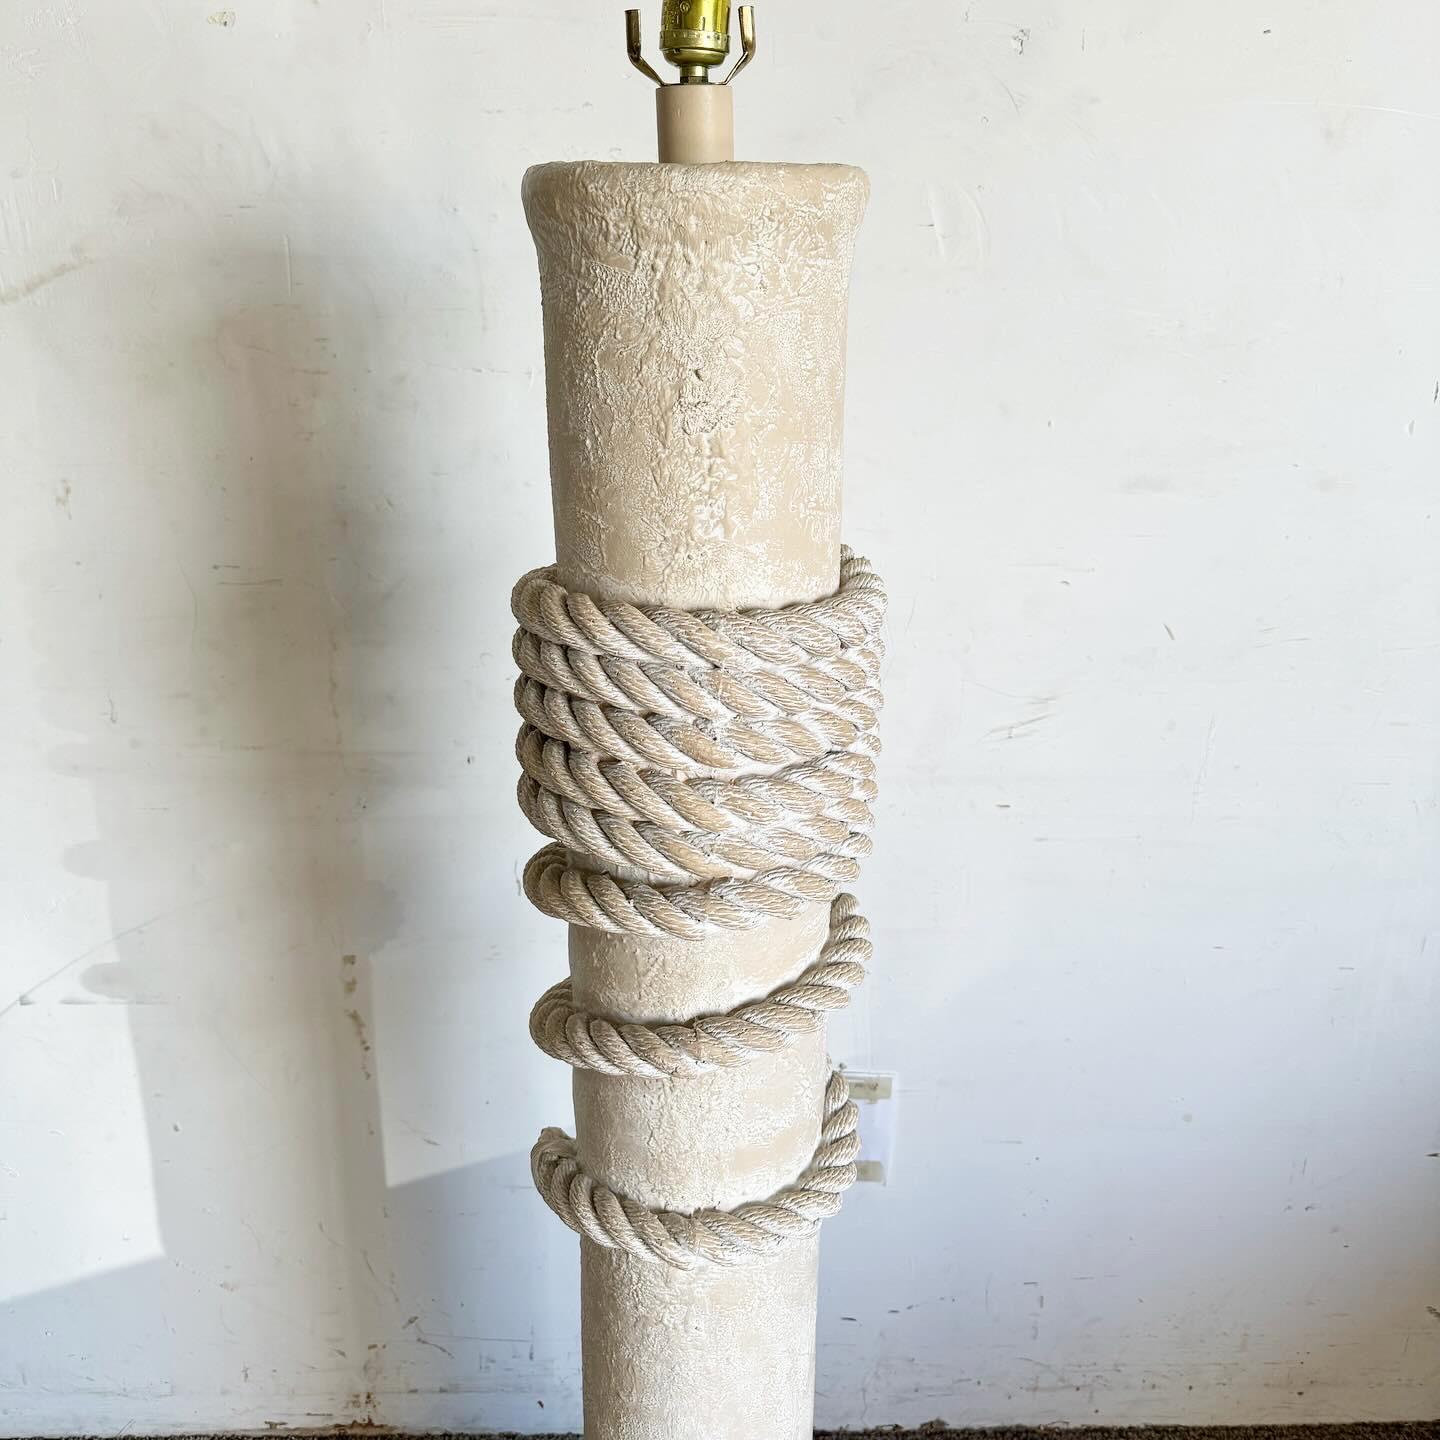 The Postmodern Faux Roped Pillar Floor Lamp is a unique and elegant addition to any room. With an off-white/beige textured finish, it exudes contemporary sophistication. The highlight is its sculpted faux rope detail, adding artistic flair. This